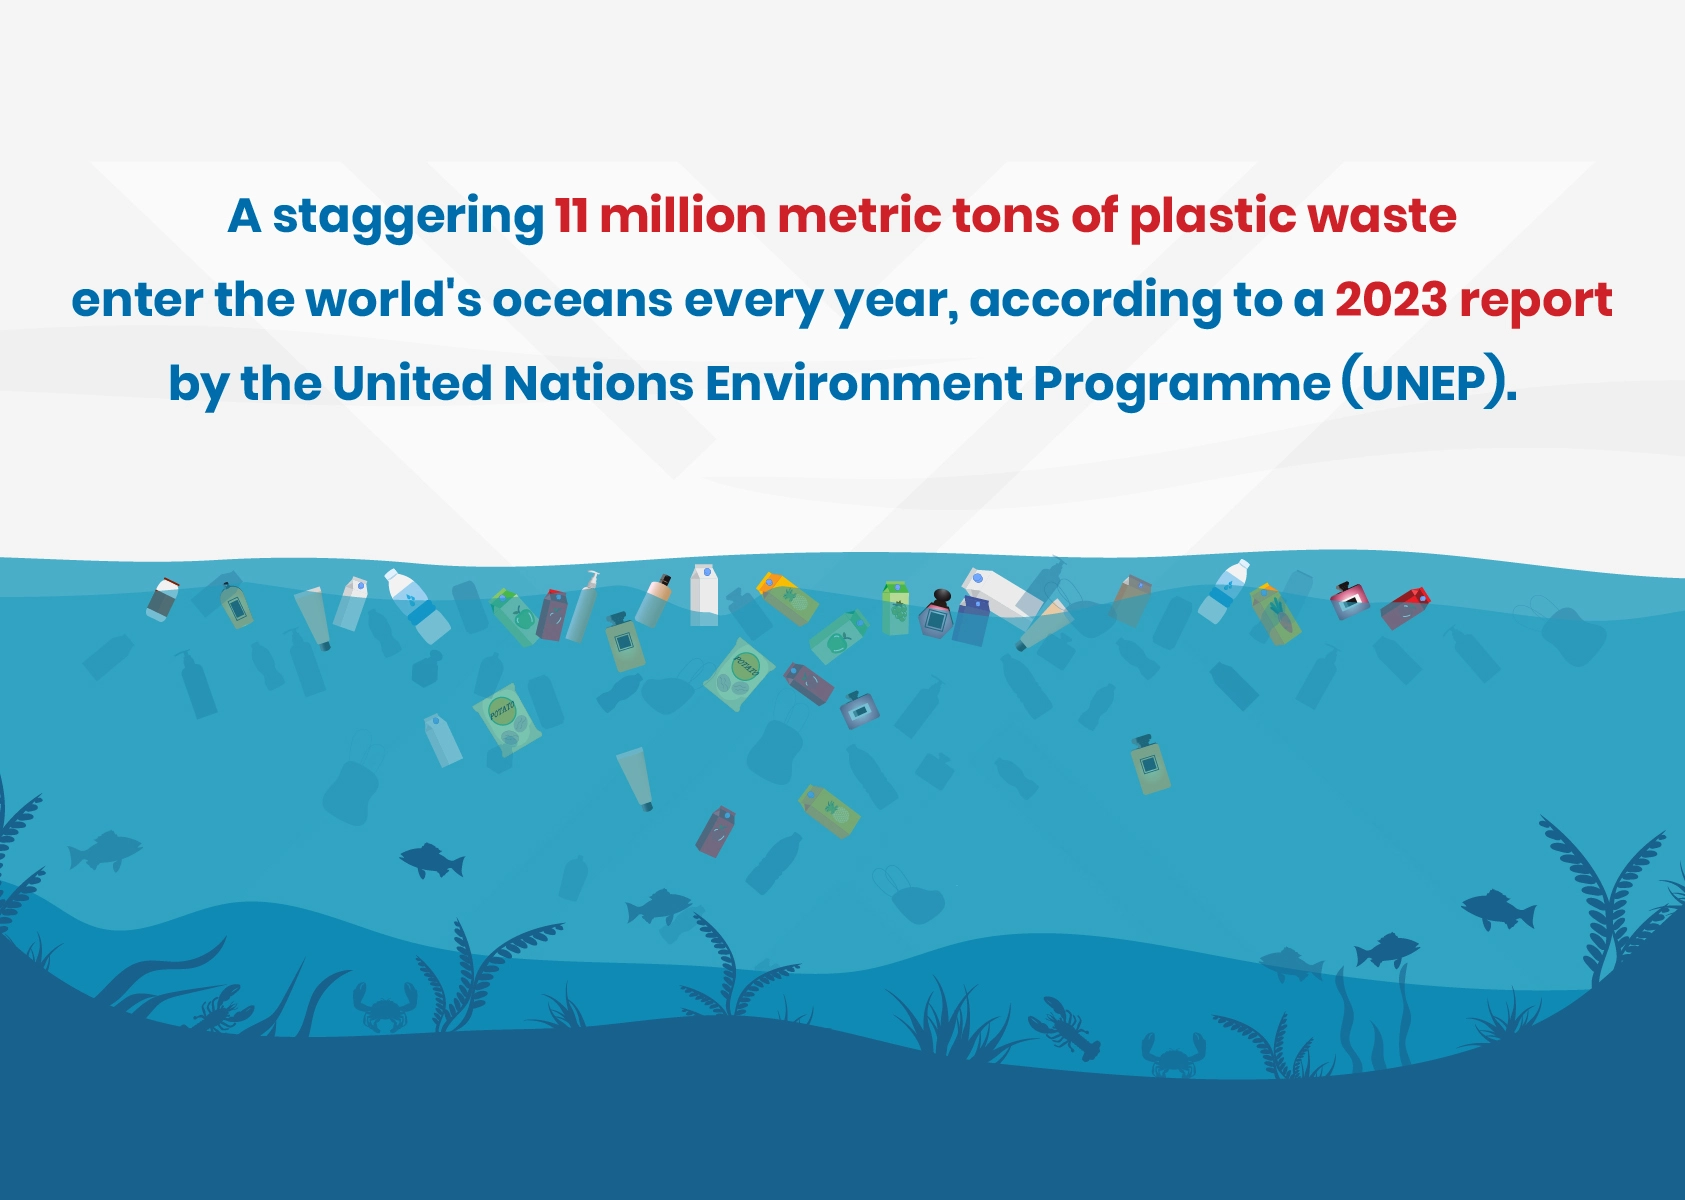  A staggering 11 million metric tons of plastic waste enter the world's oceans every year, according to a 2023 report by the United Nations Environment Programme (UNEP)